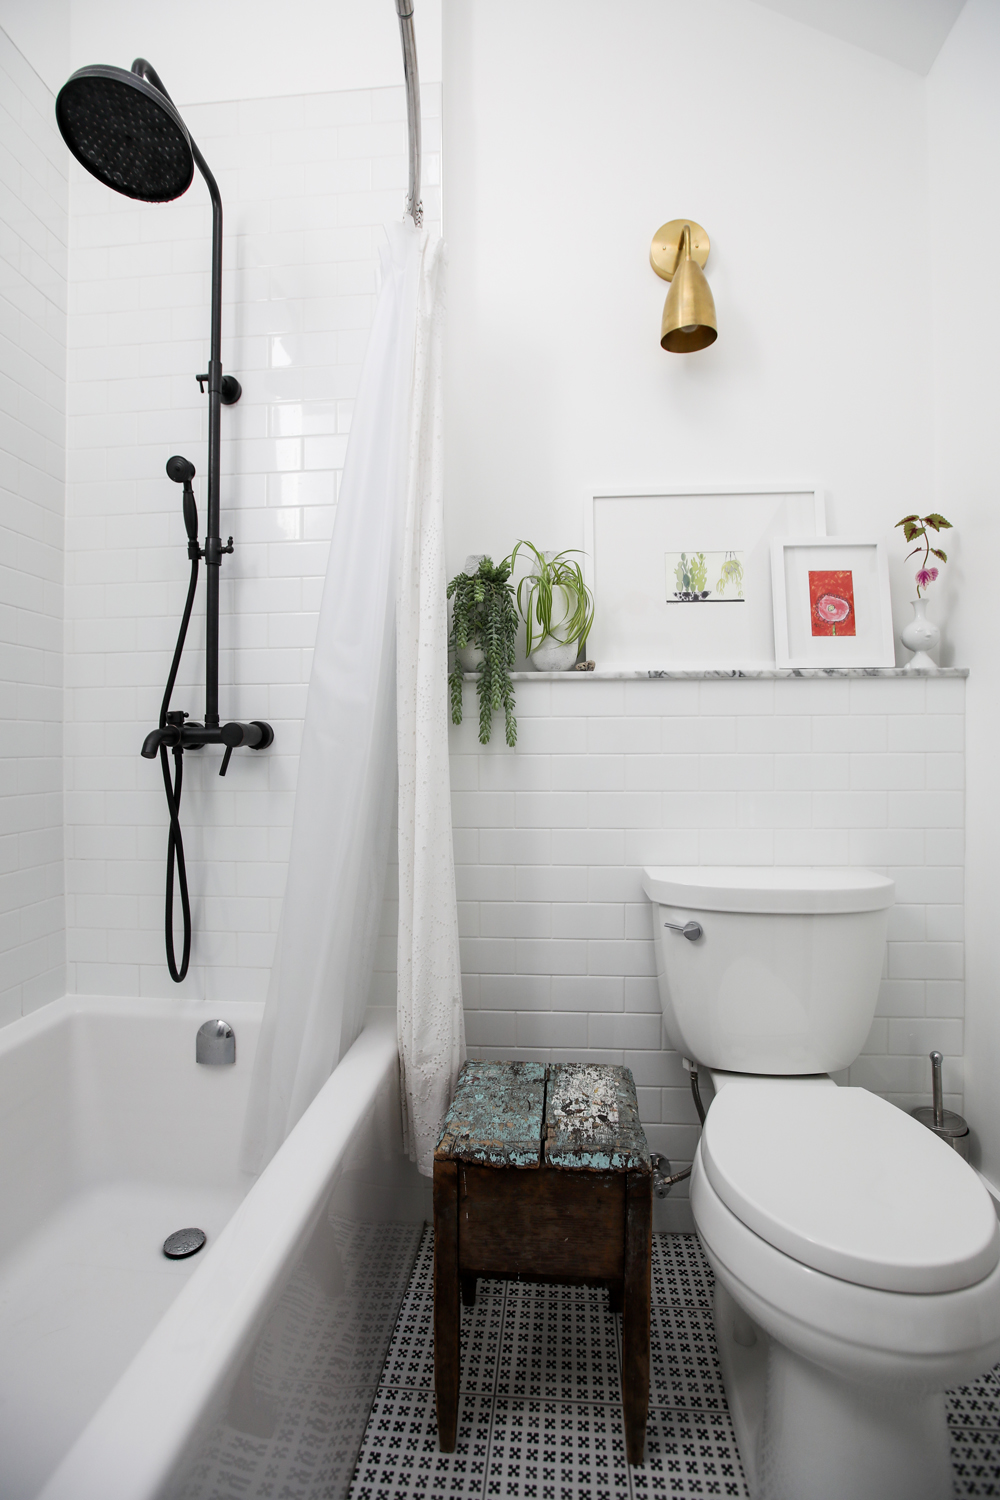 White bathroom with statement gold light and plant shelf